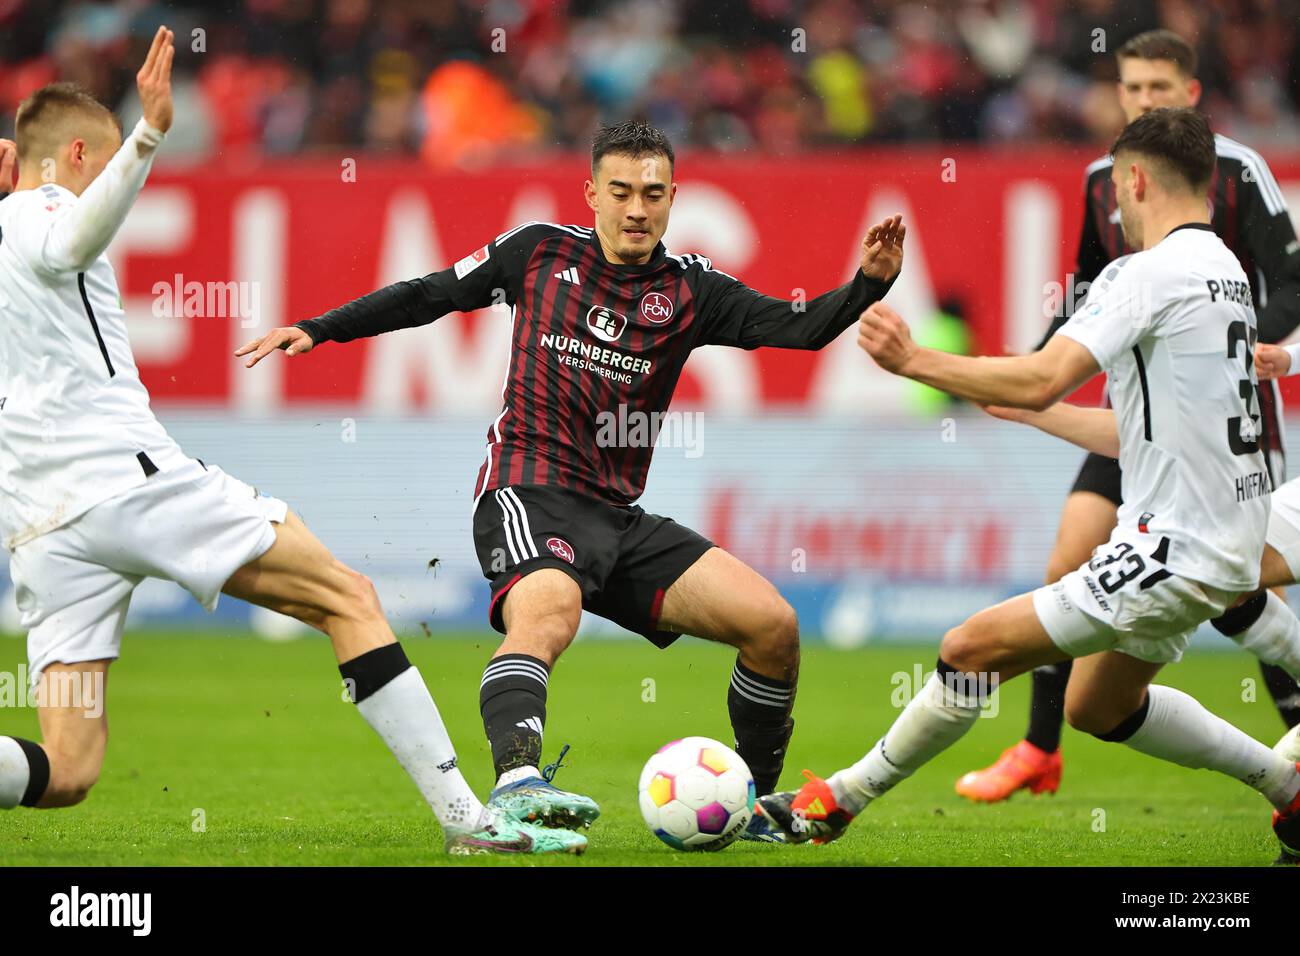 Nuremberg, Germany. 19th Apr, 2024. Soccer: Bundesliga 2, 1. FC Nürnberg - SC Paderborn 07, matchday 30 at the Max Morlock Stadium. Nuremberg's Jens Castrop (center) battles for the ball with Filip Bilbija (left) and Marcel Hoffmeier from Paderborn. Credit: Daniel Karmann/dpa - IMPORTANT NOTE: In accordance with the regulations of the DFL German Football League and the DFB German Football Association, it is prohibited to utilize or have utilized photographs taken in the stadium and/or of the match in the form of sequential images and/or video-like photo series./dpa/Alamy Live News Stock Photo